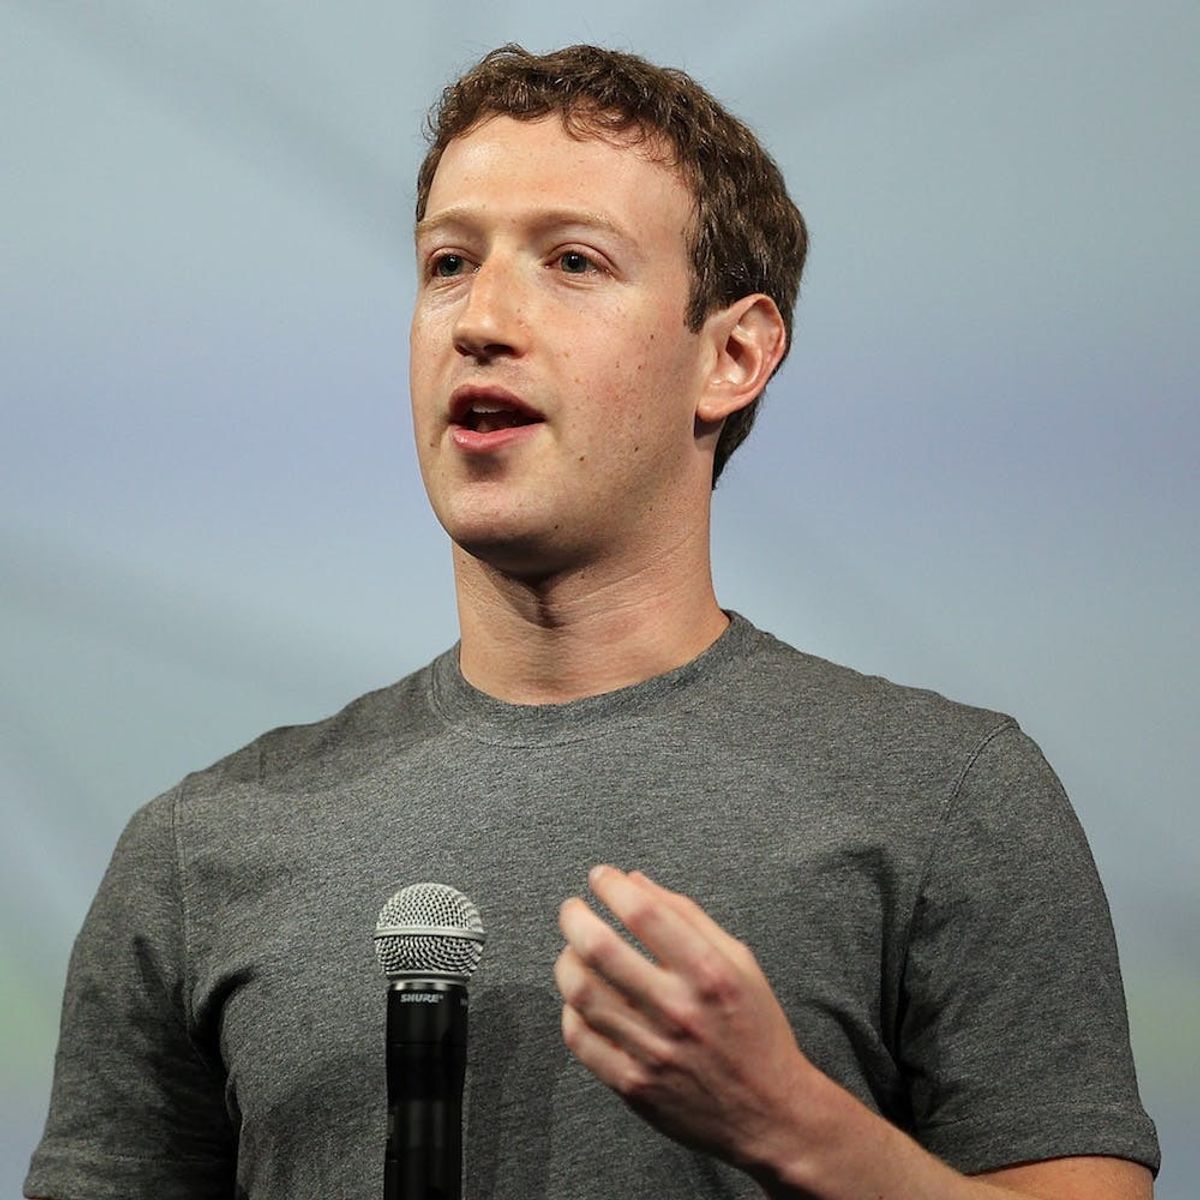 Guess What? You Can’t Block Mark Zuckerberg on Facebook